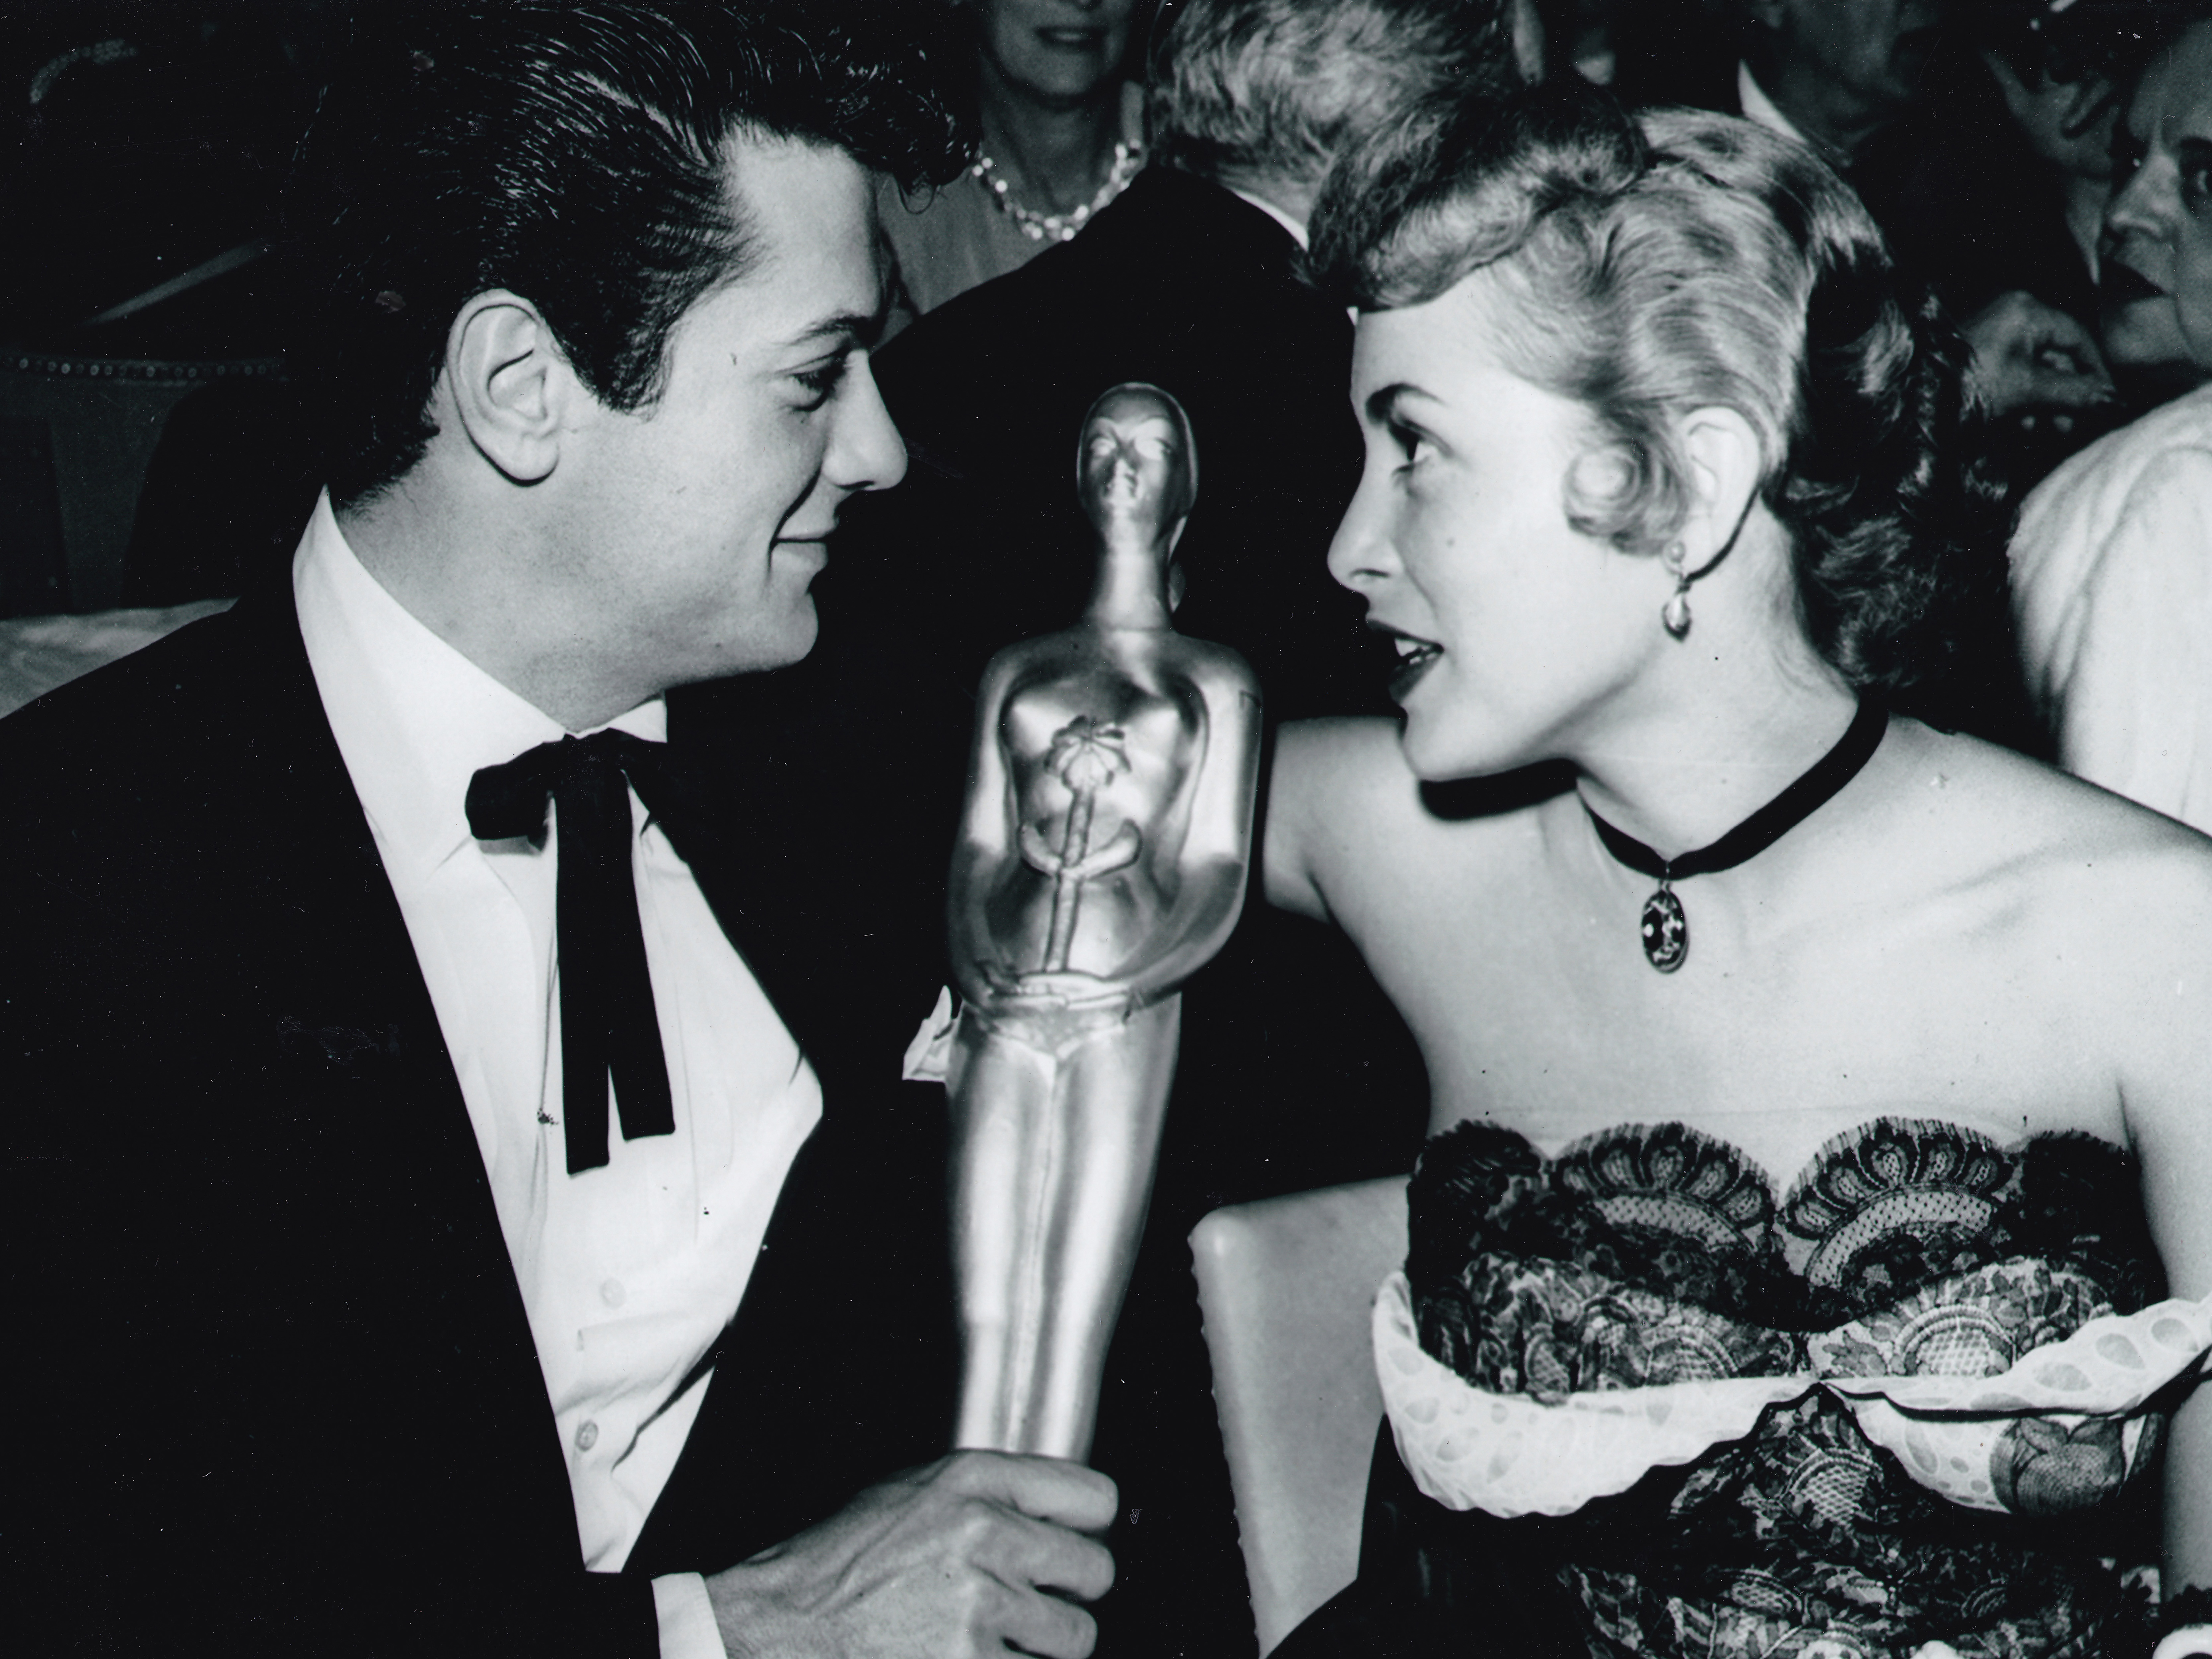 Tony Curtis and Janet Leigh